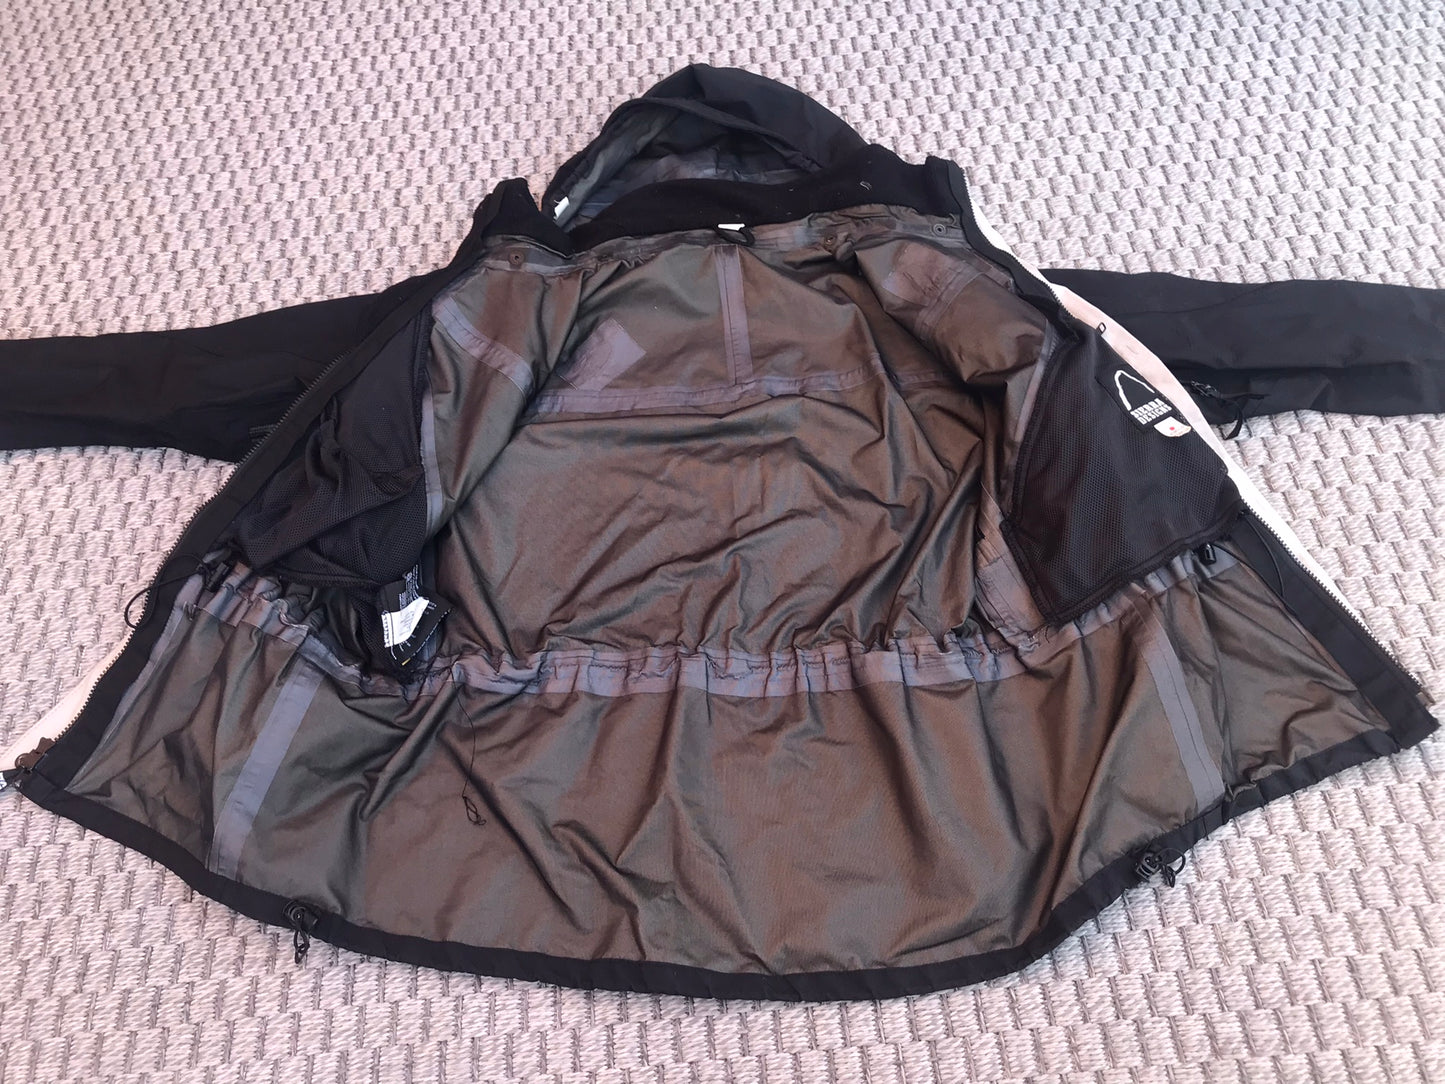 Rain Coat Ladies Size Small - Medium Gore-Tex Sierra Gore-Tex All Zippers Sealed Seams Vents Under Arms Black Outstanding Quality